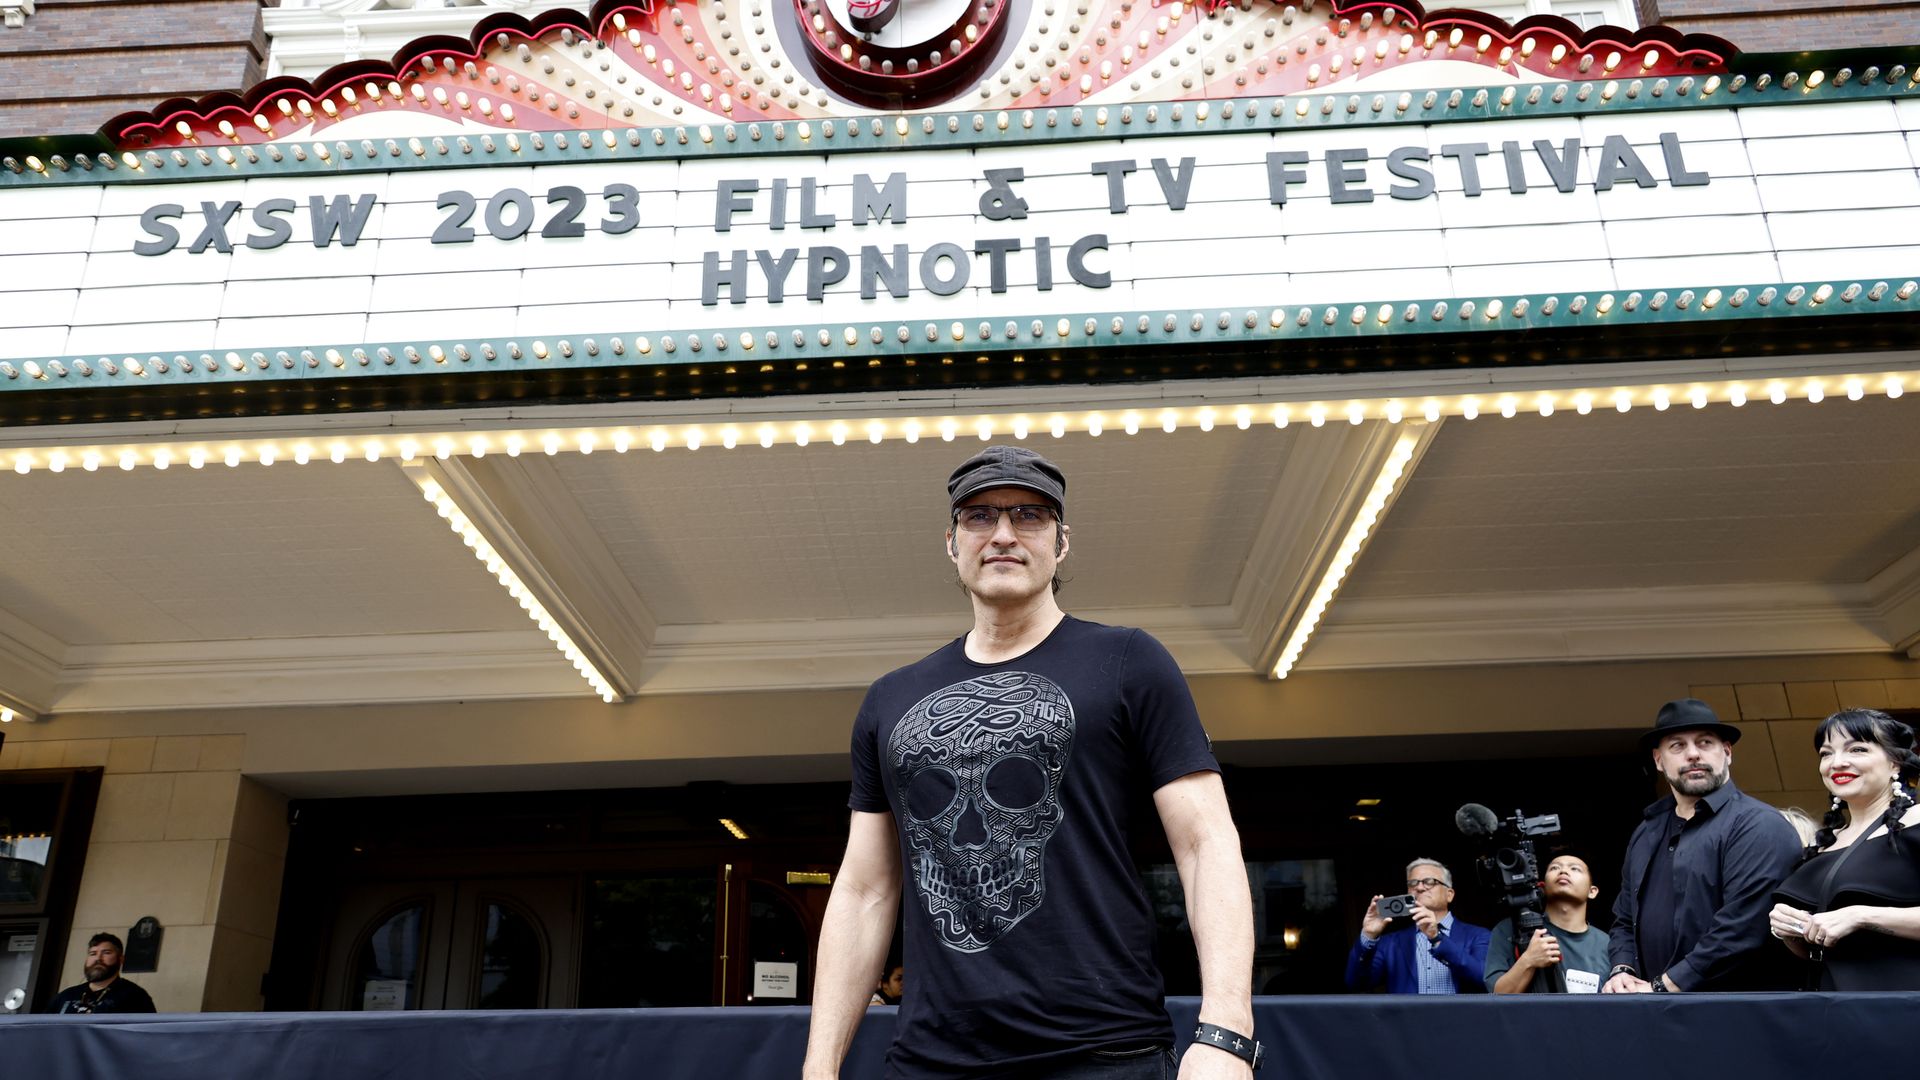 Robert Rodriguez outside the Paramount Theater ahead of the premiere of Hypnotic, his film shot in Austin.